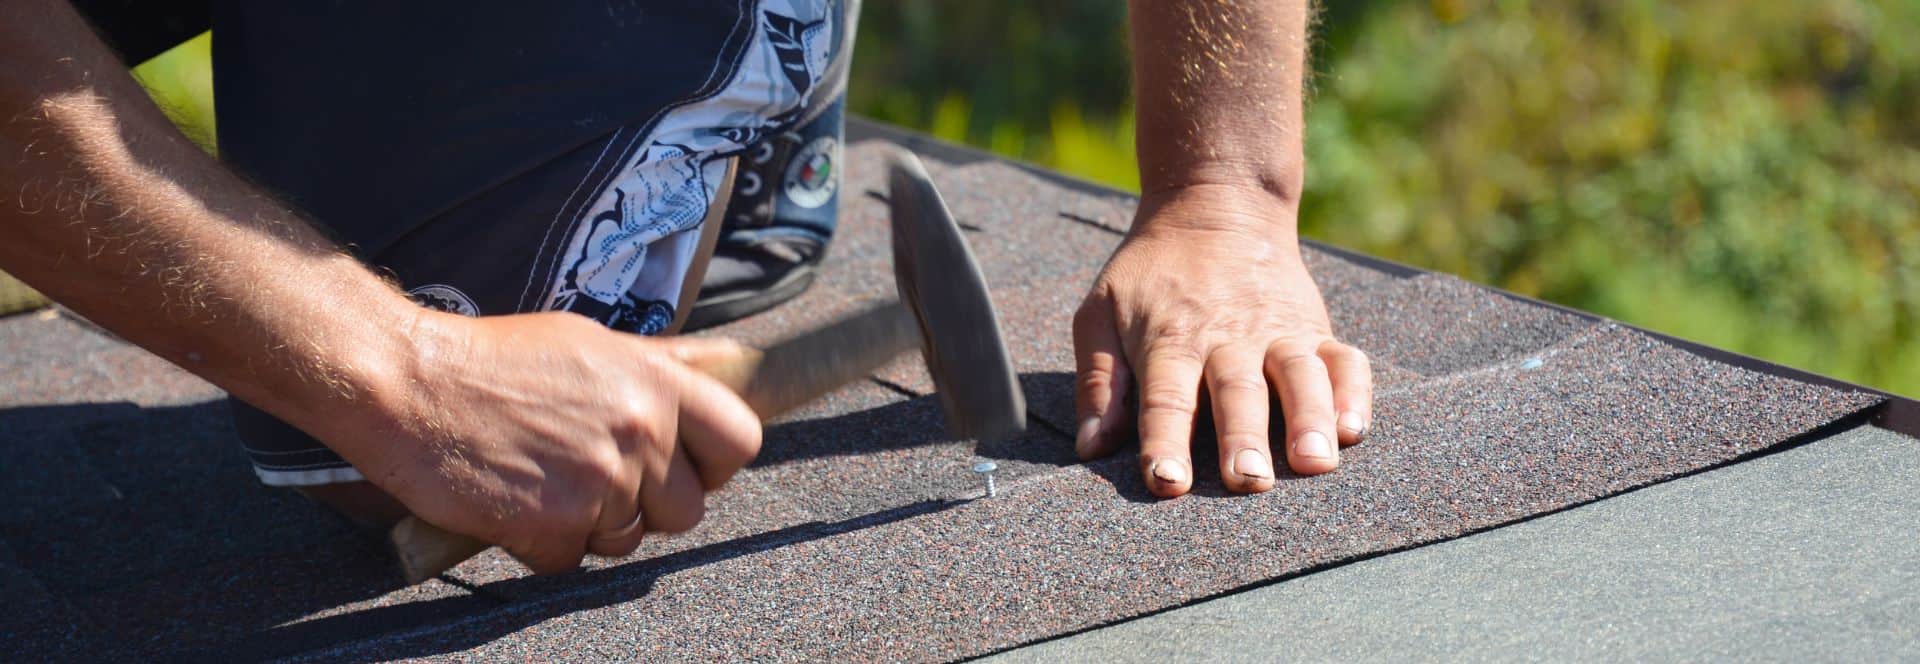 How to Find the Best Roof Repair Contractor in Sacramento, CA?